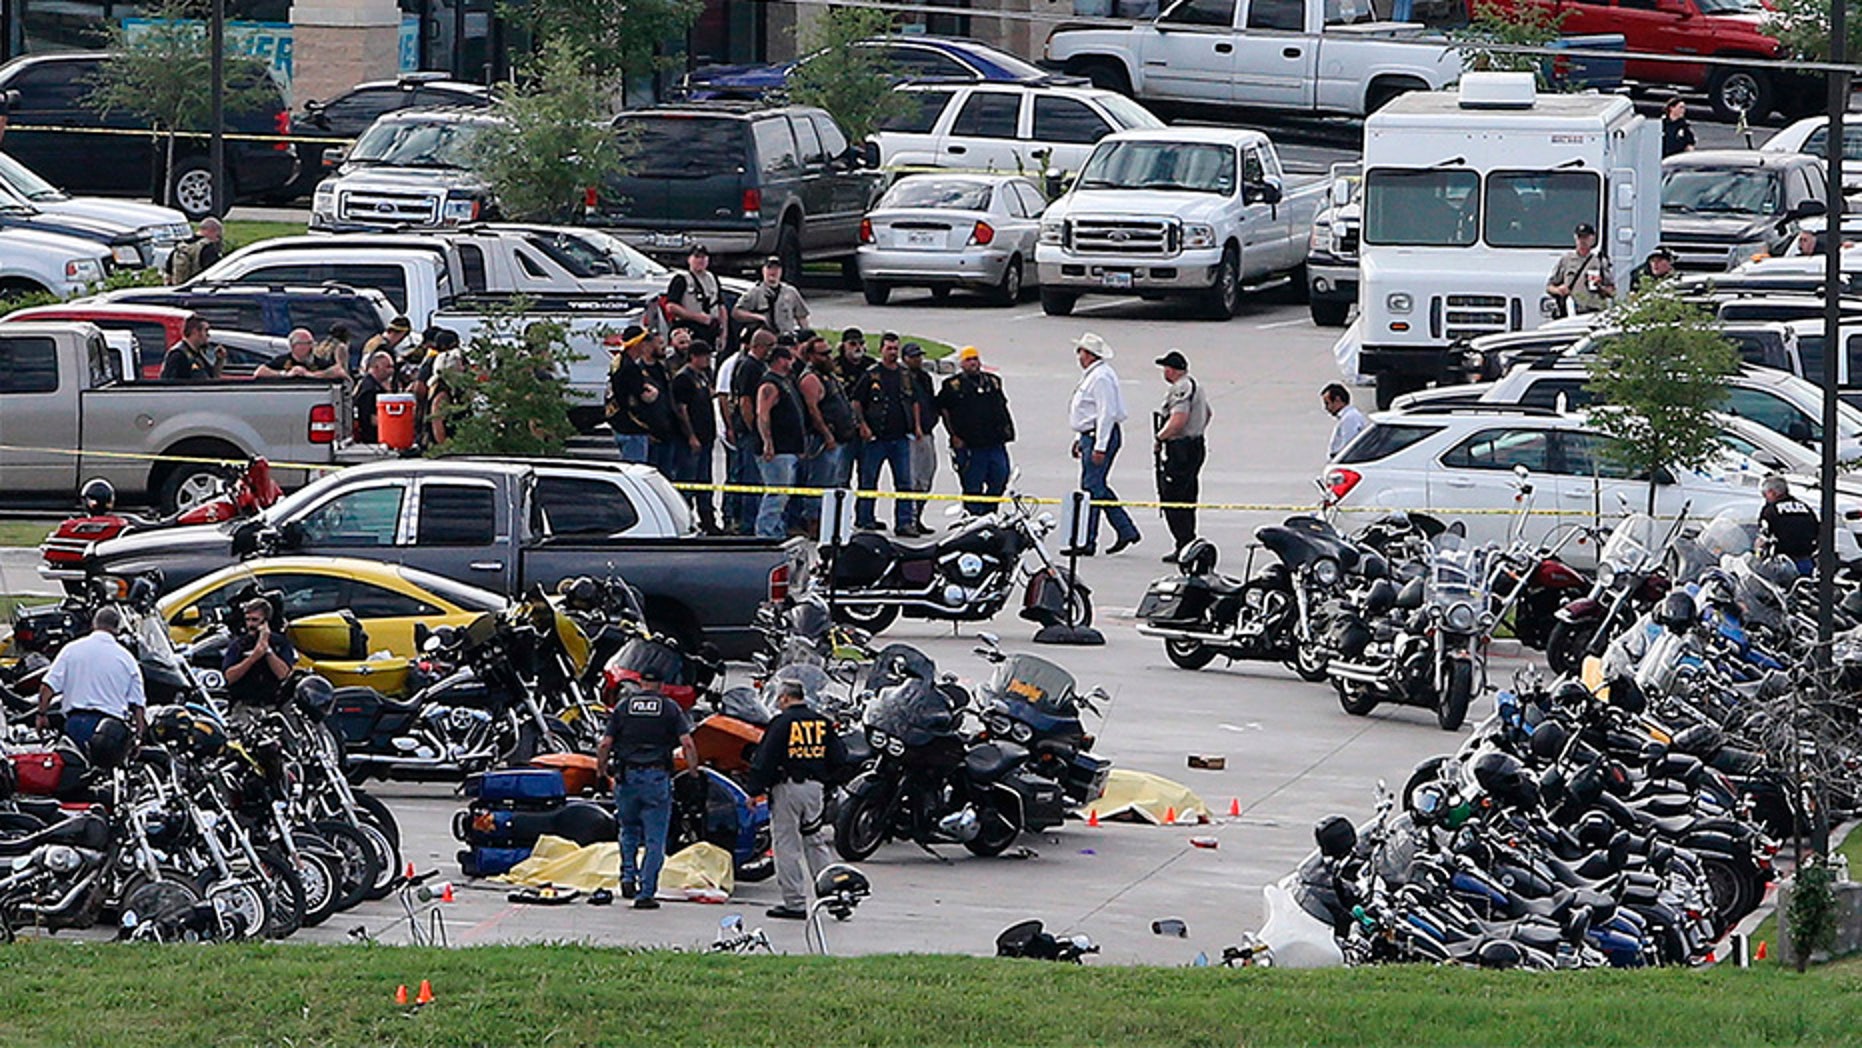 3 Bikers Hit With Murder Charges Following Shootout At Texas Restaurant Fox News